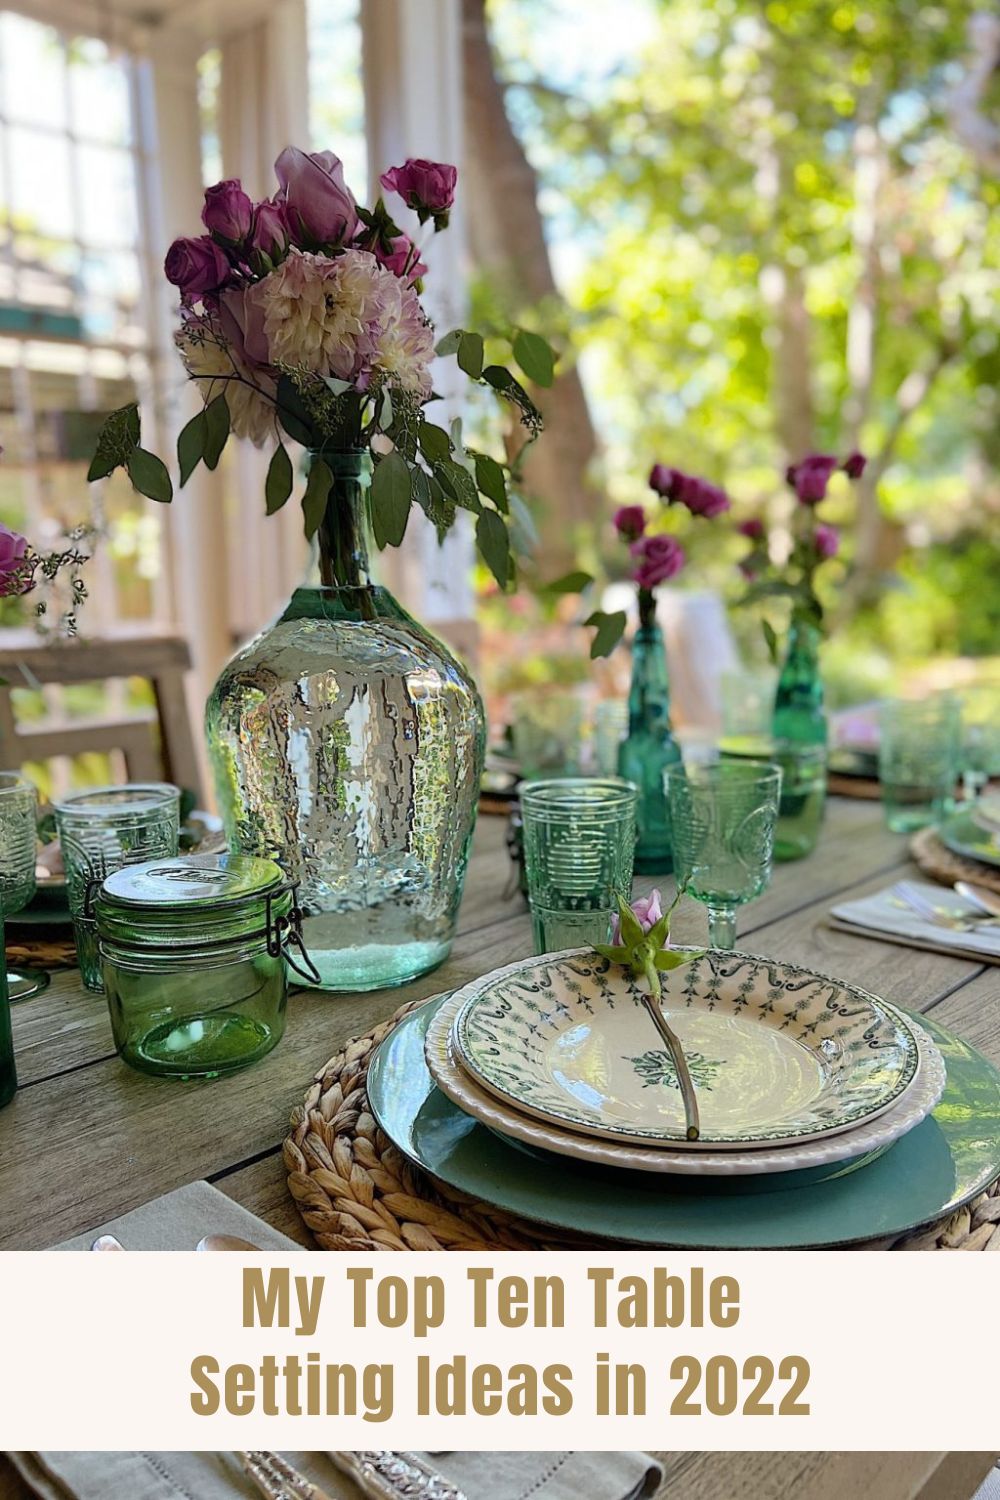 Today's top ten list is a "free for all" which means we get to pick our own top ten topics. I selected my favorite top ten table-setting ideas because I love to set tables!